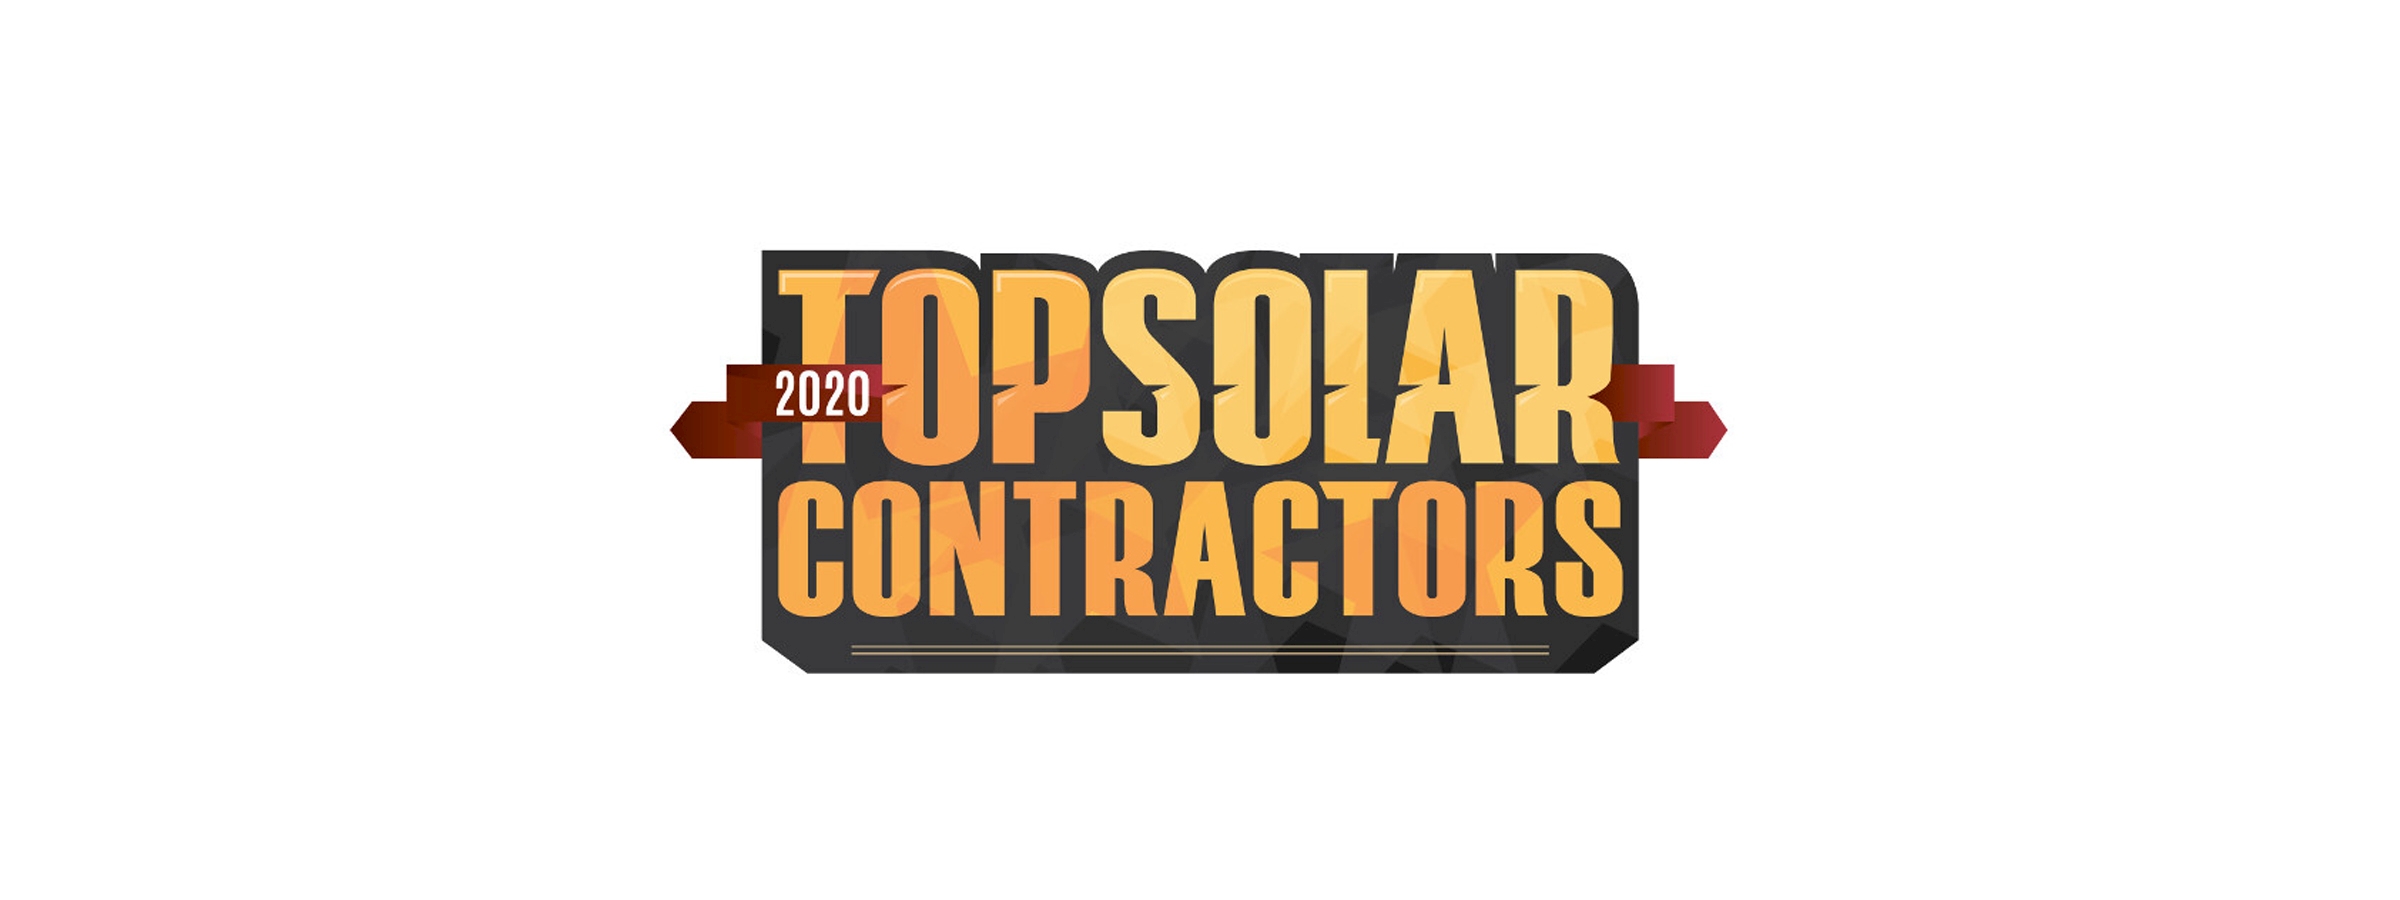 Boston Solar Named “Top Solar Contractor” for 5th Consecutive Year